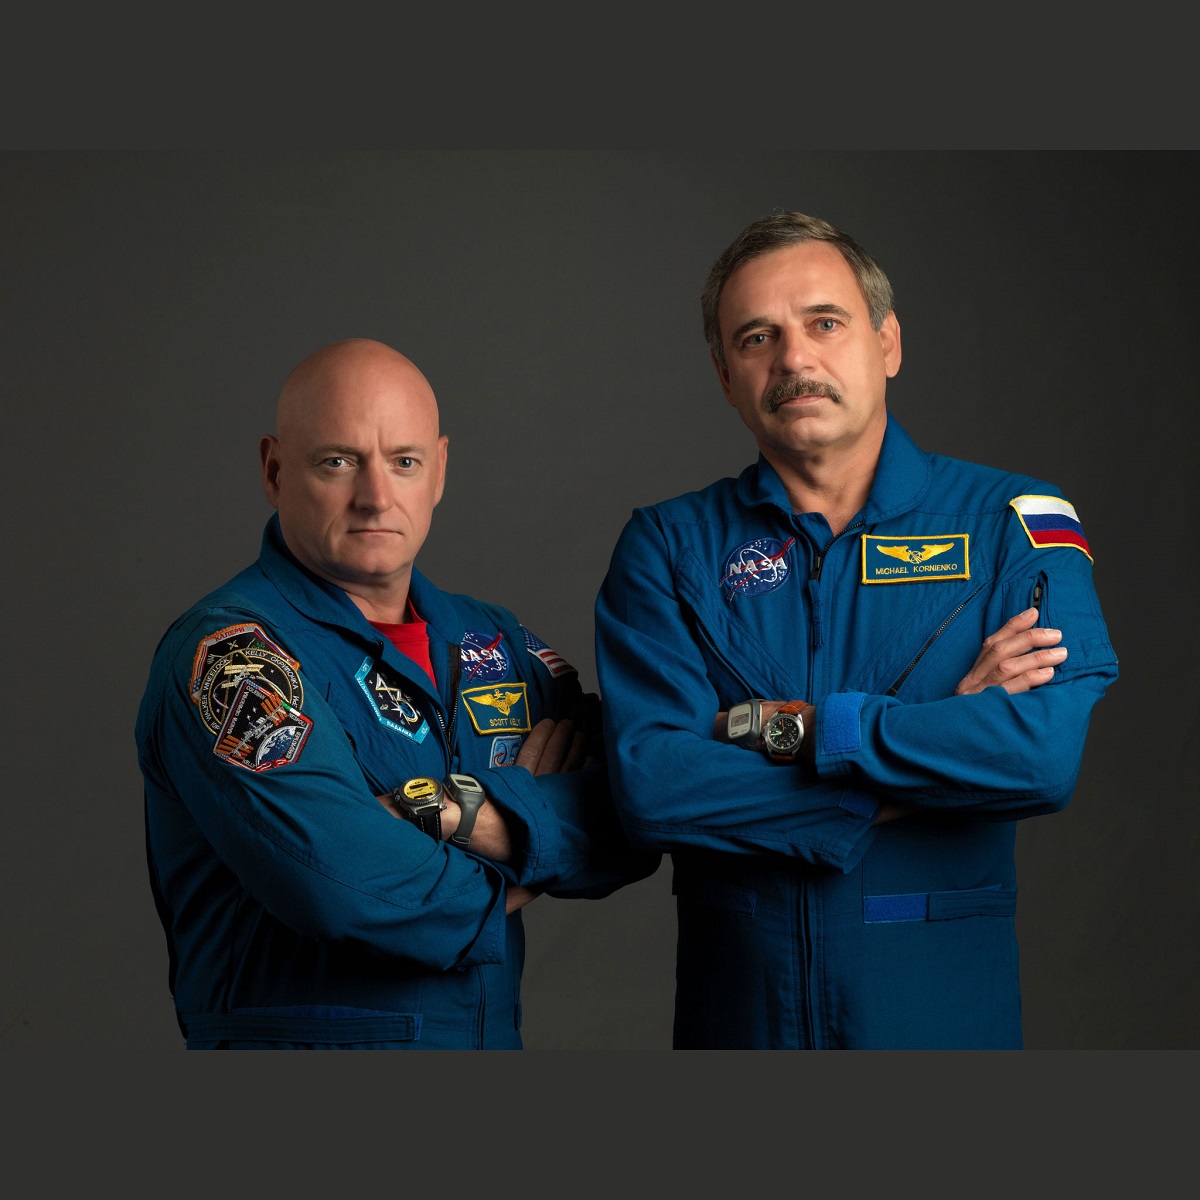 NASA astronaut Scott Kelly (left), Expedition 43/44 flight engineer and Expedition 45/46 commander; and Russian cosmonaut Mikhail Kornienko, Expedition 43-46 flight engineer, take a break from training at NASA's Johnson Space Center to pose for a portrait. Image Credit: NASA/Bill Stafford